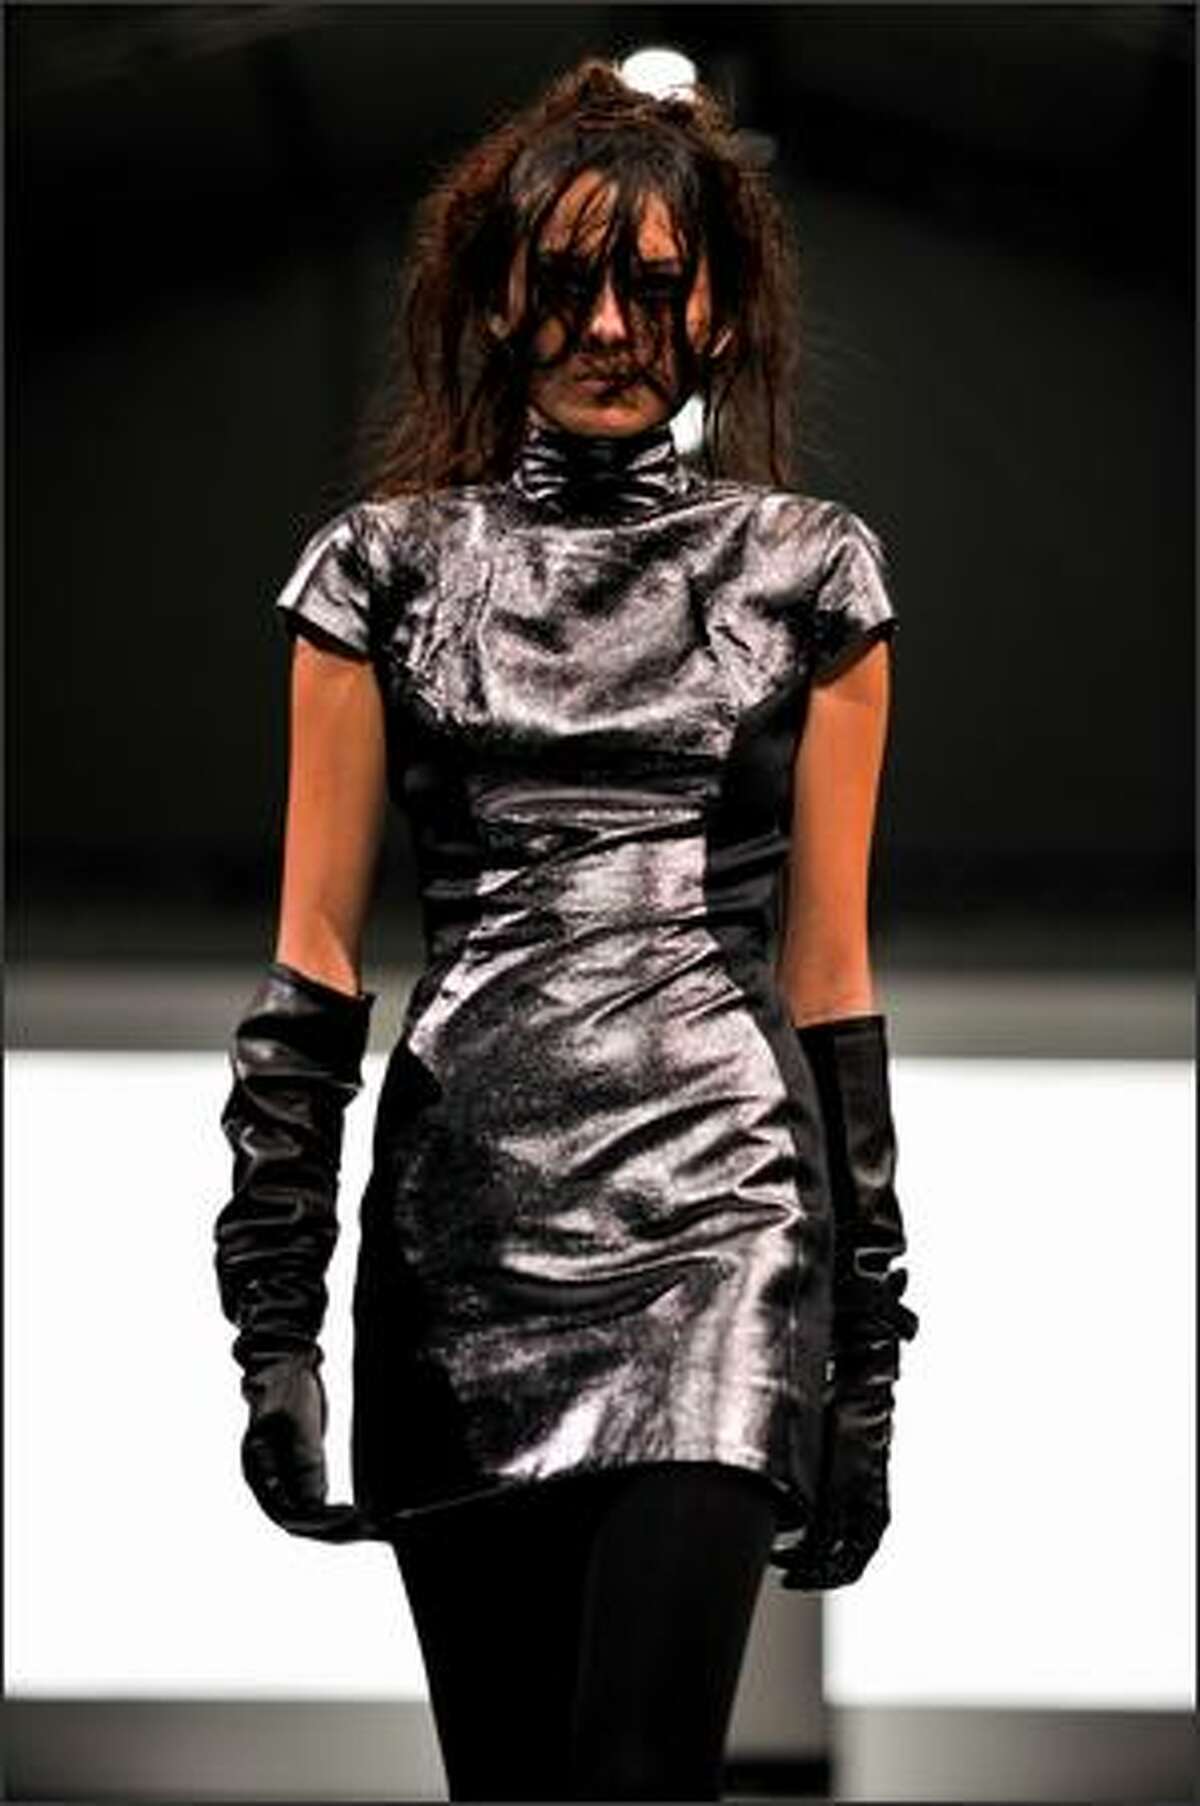 A model walks the runway wearing designs by Gareth Pugh on the closing catwalk at the Ngee Ann City Civic Plaza on day two of Audi Fashion Festival Singapore in Singapore on Thursday, May 7, 2009.